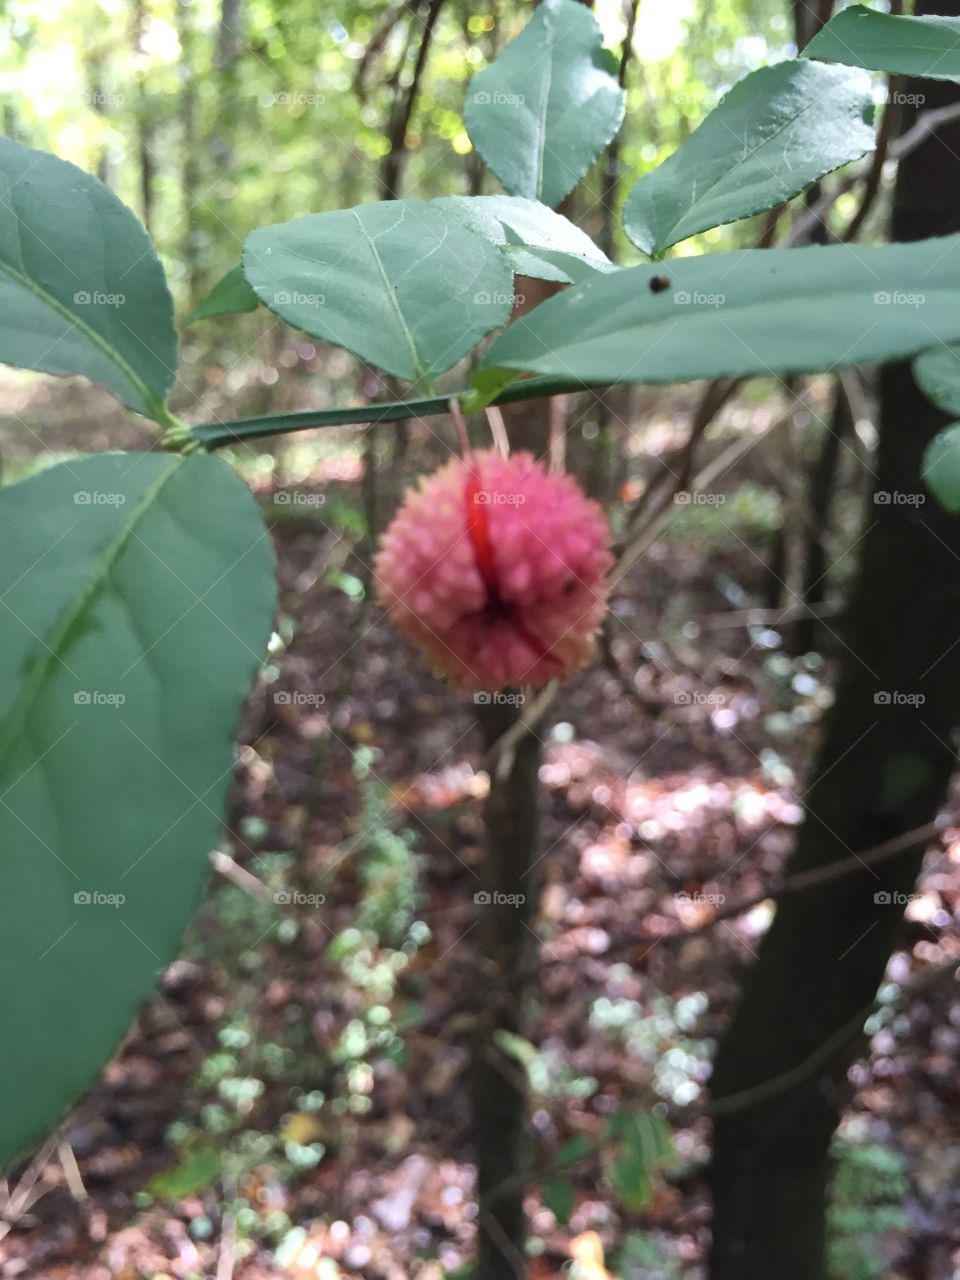 This is the berry on the Strawberry bush before it opens to reveal 4 smaller oval berries. It is found in the understory of a North Georgia forest during late October.